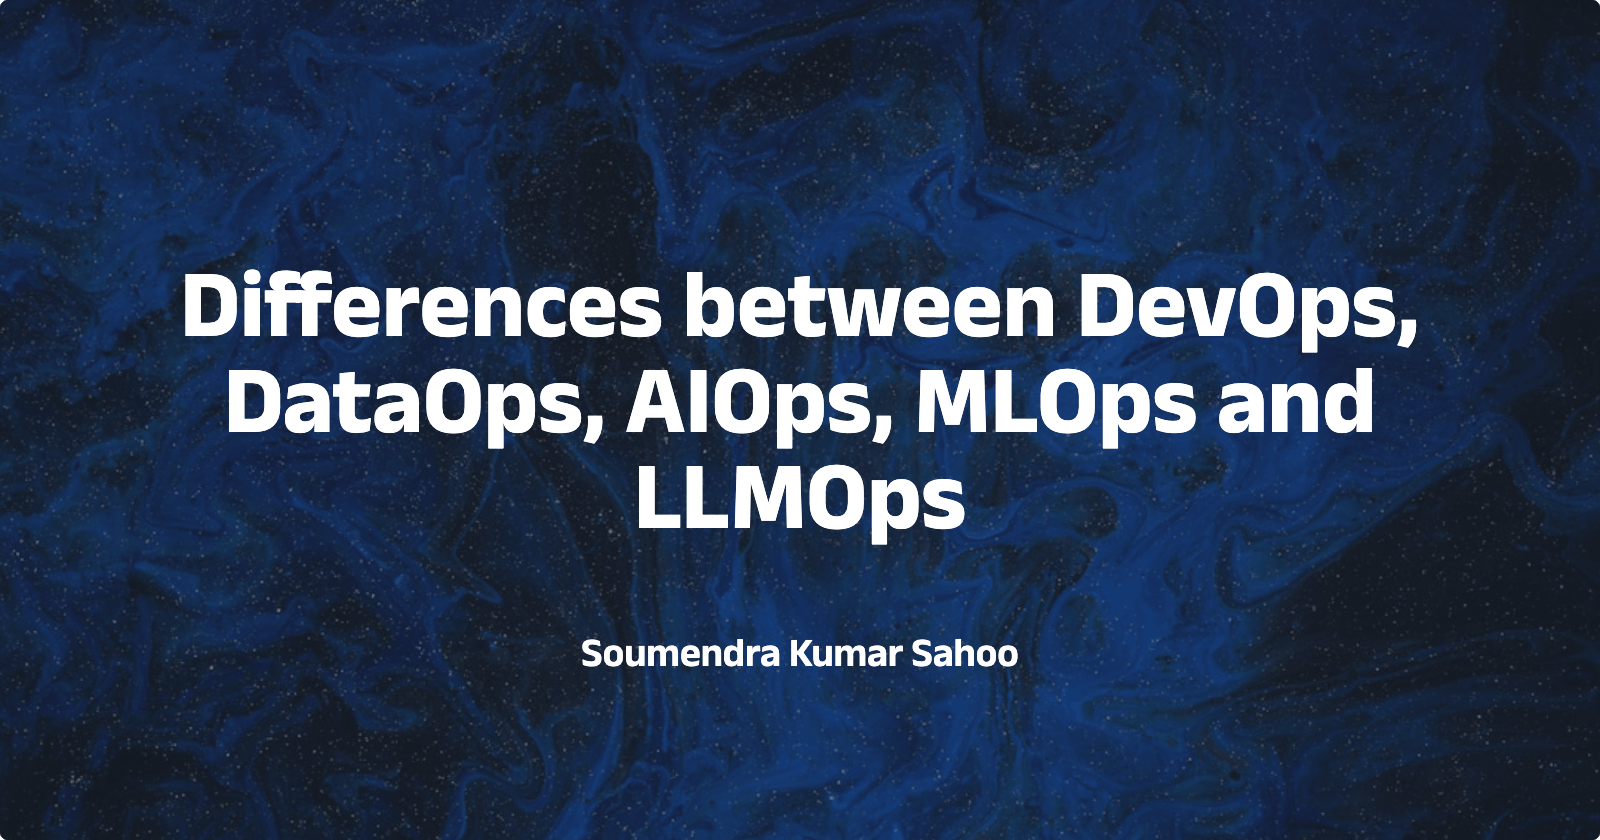 Comparing DevOps, DataOps, AIOps, MLOps, and LLMOps: Key Differences